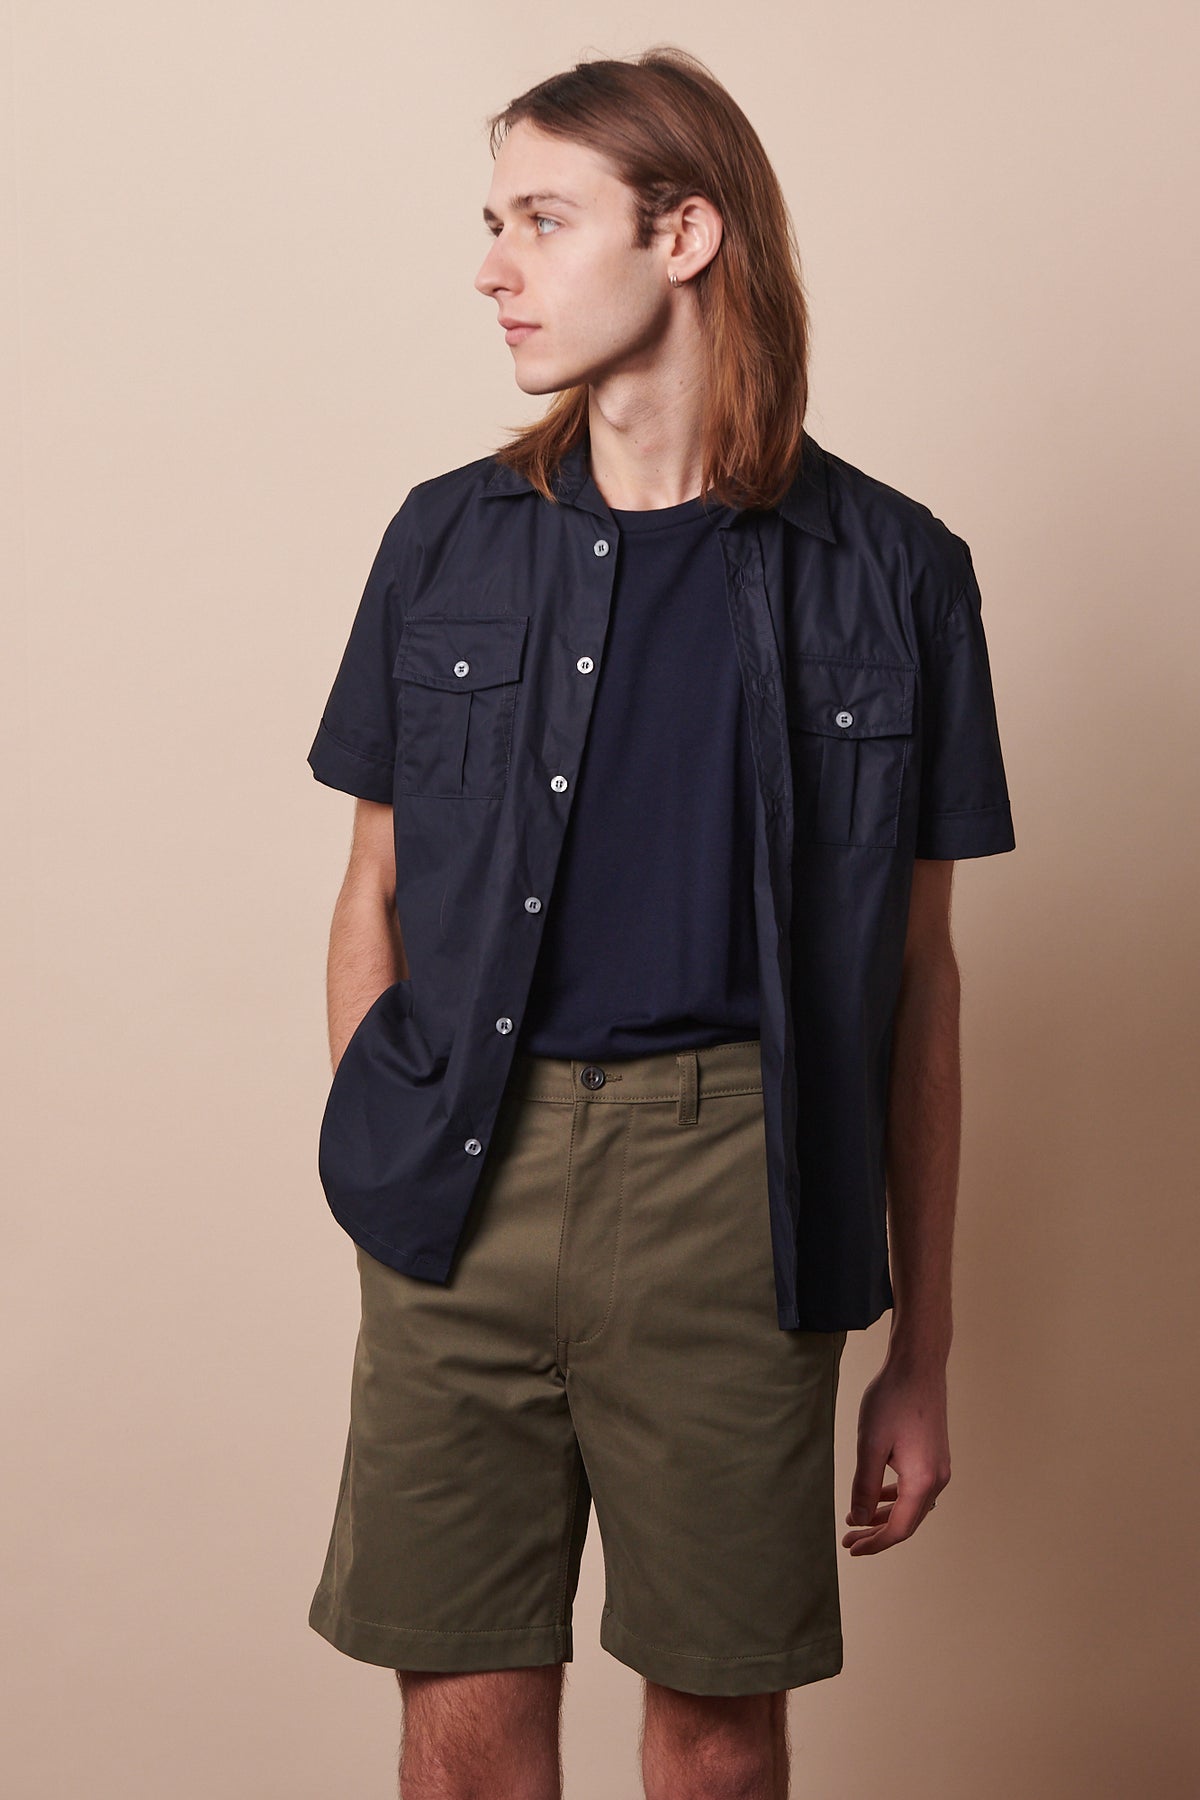 
            Knee up image of male wearing classic shorts in olive paired navy military shirt layered over short sleeve navy t shirt